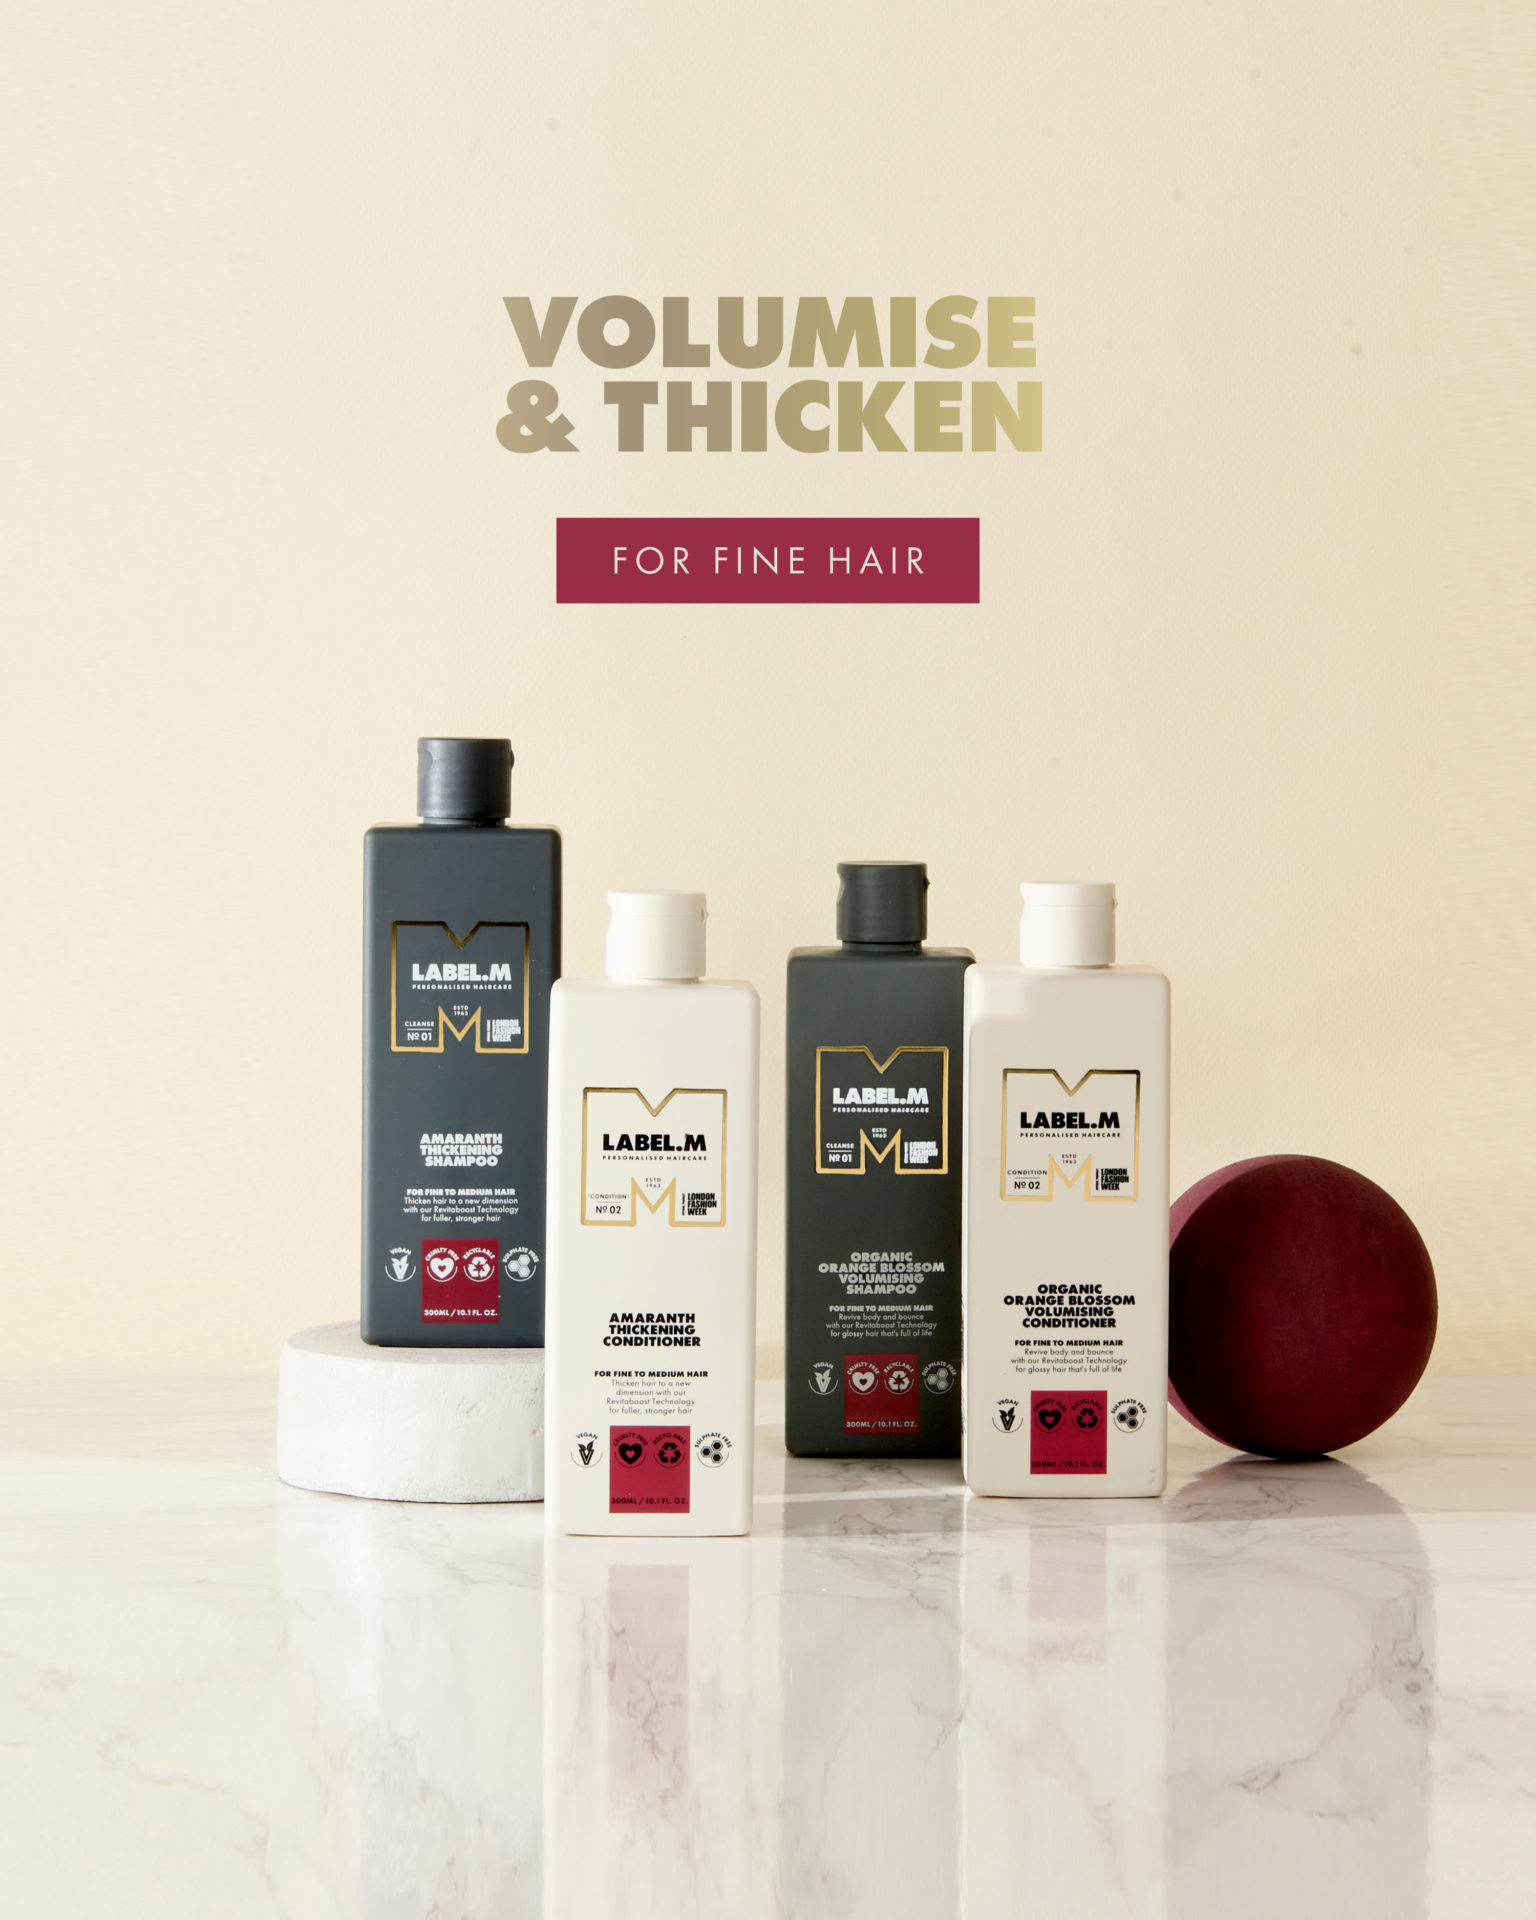 VOLUMISE AND THICKEN LABEL M HAIR PRODUCTS WORCESTERSHIRE